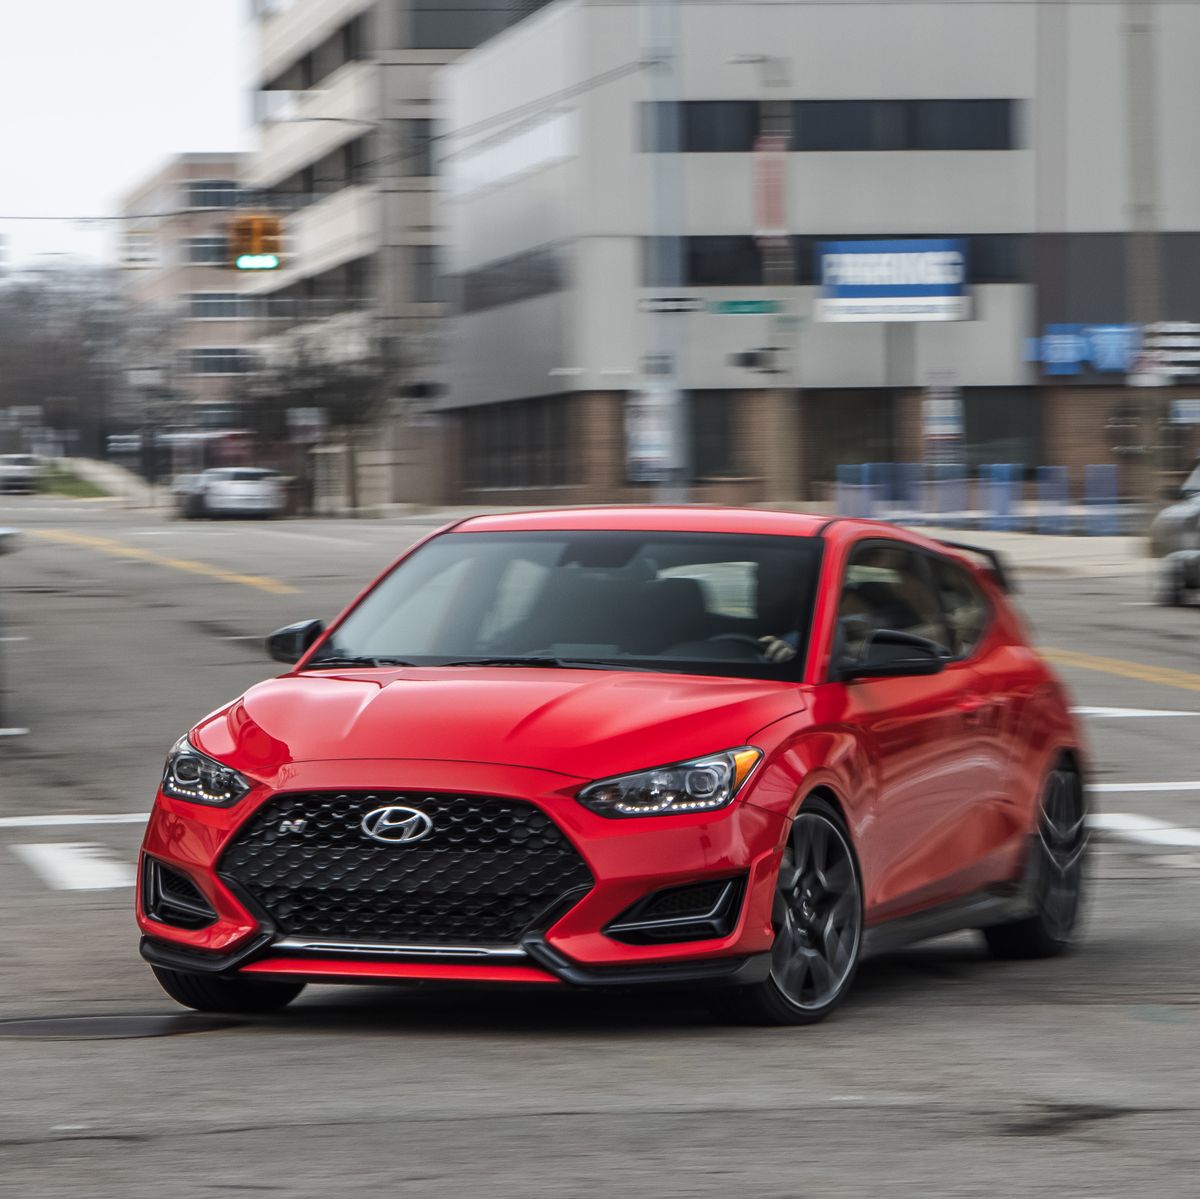 Tested: 2021 Hyundai Veloster N DCT Gets Quicker and Comfier